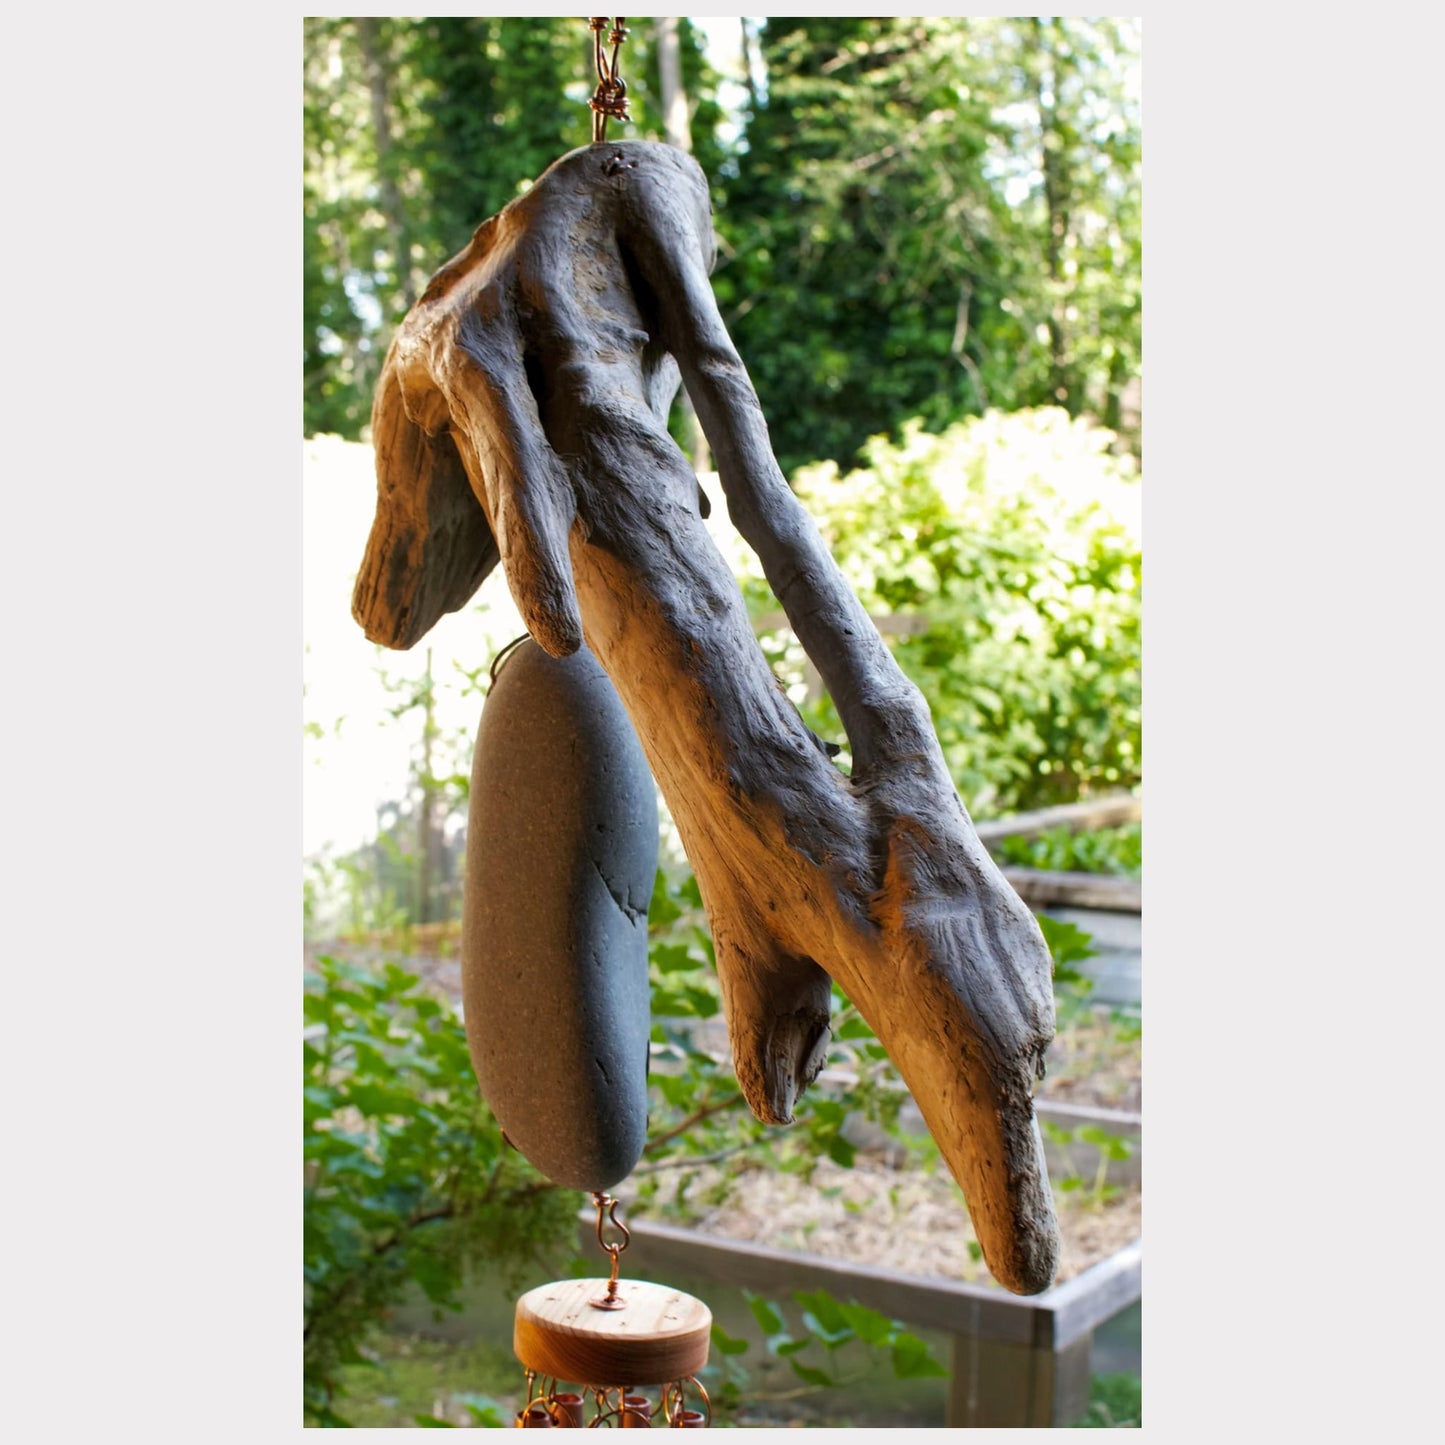 Large Beach Stone and Driftwood Wind Chime - 7 Copper Chimes - Relaxing Sound